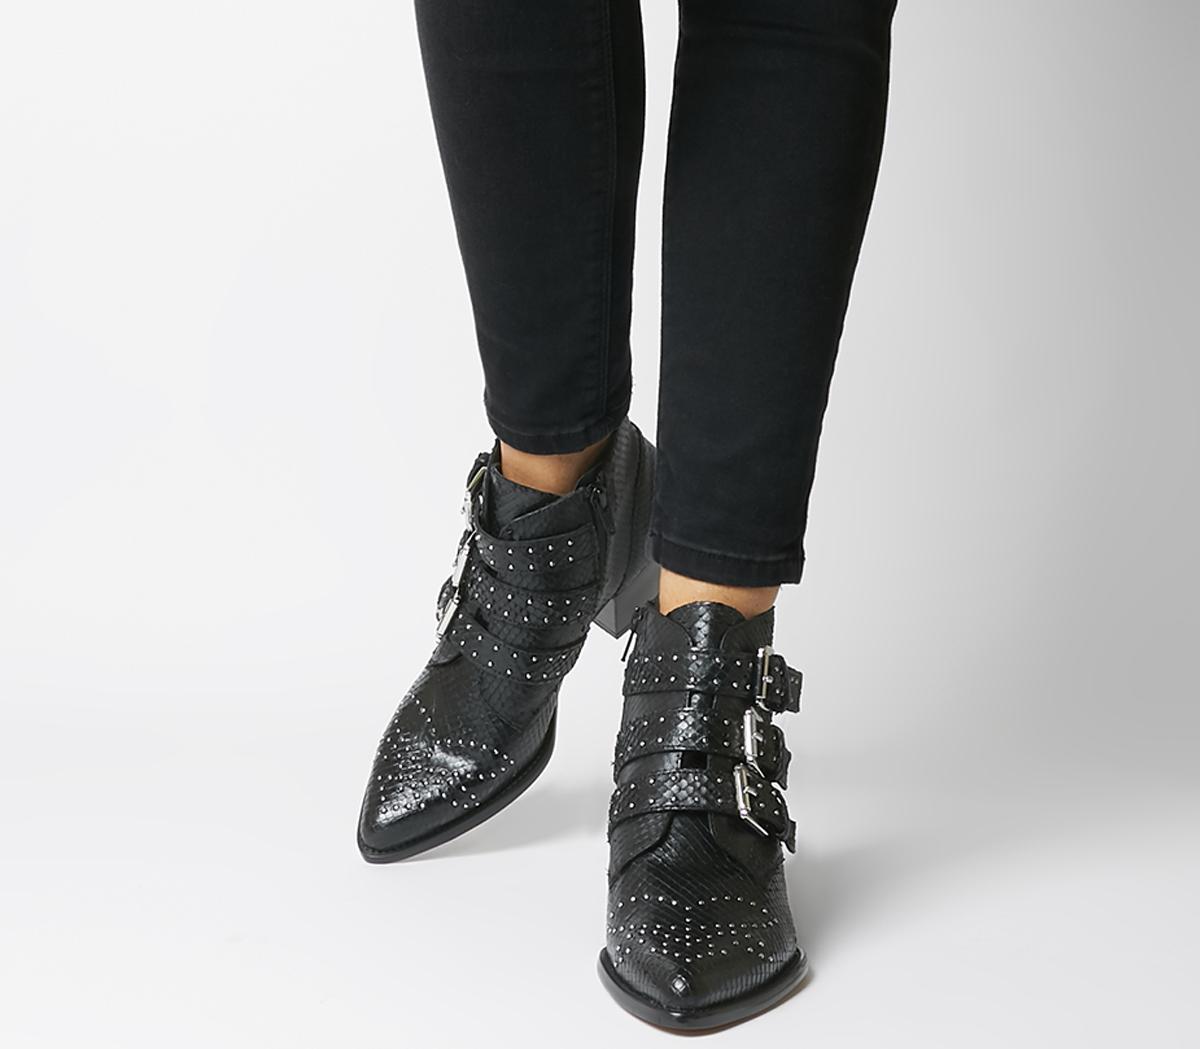 black boots with silver buckles